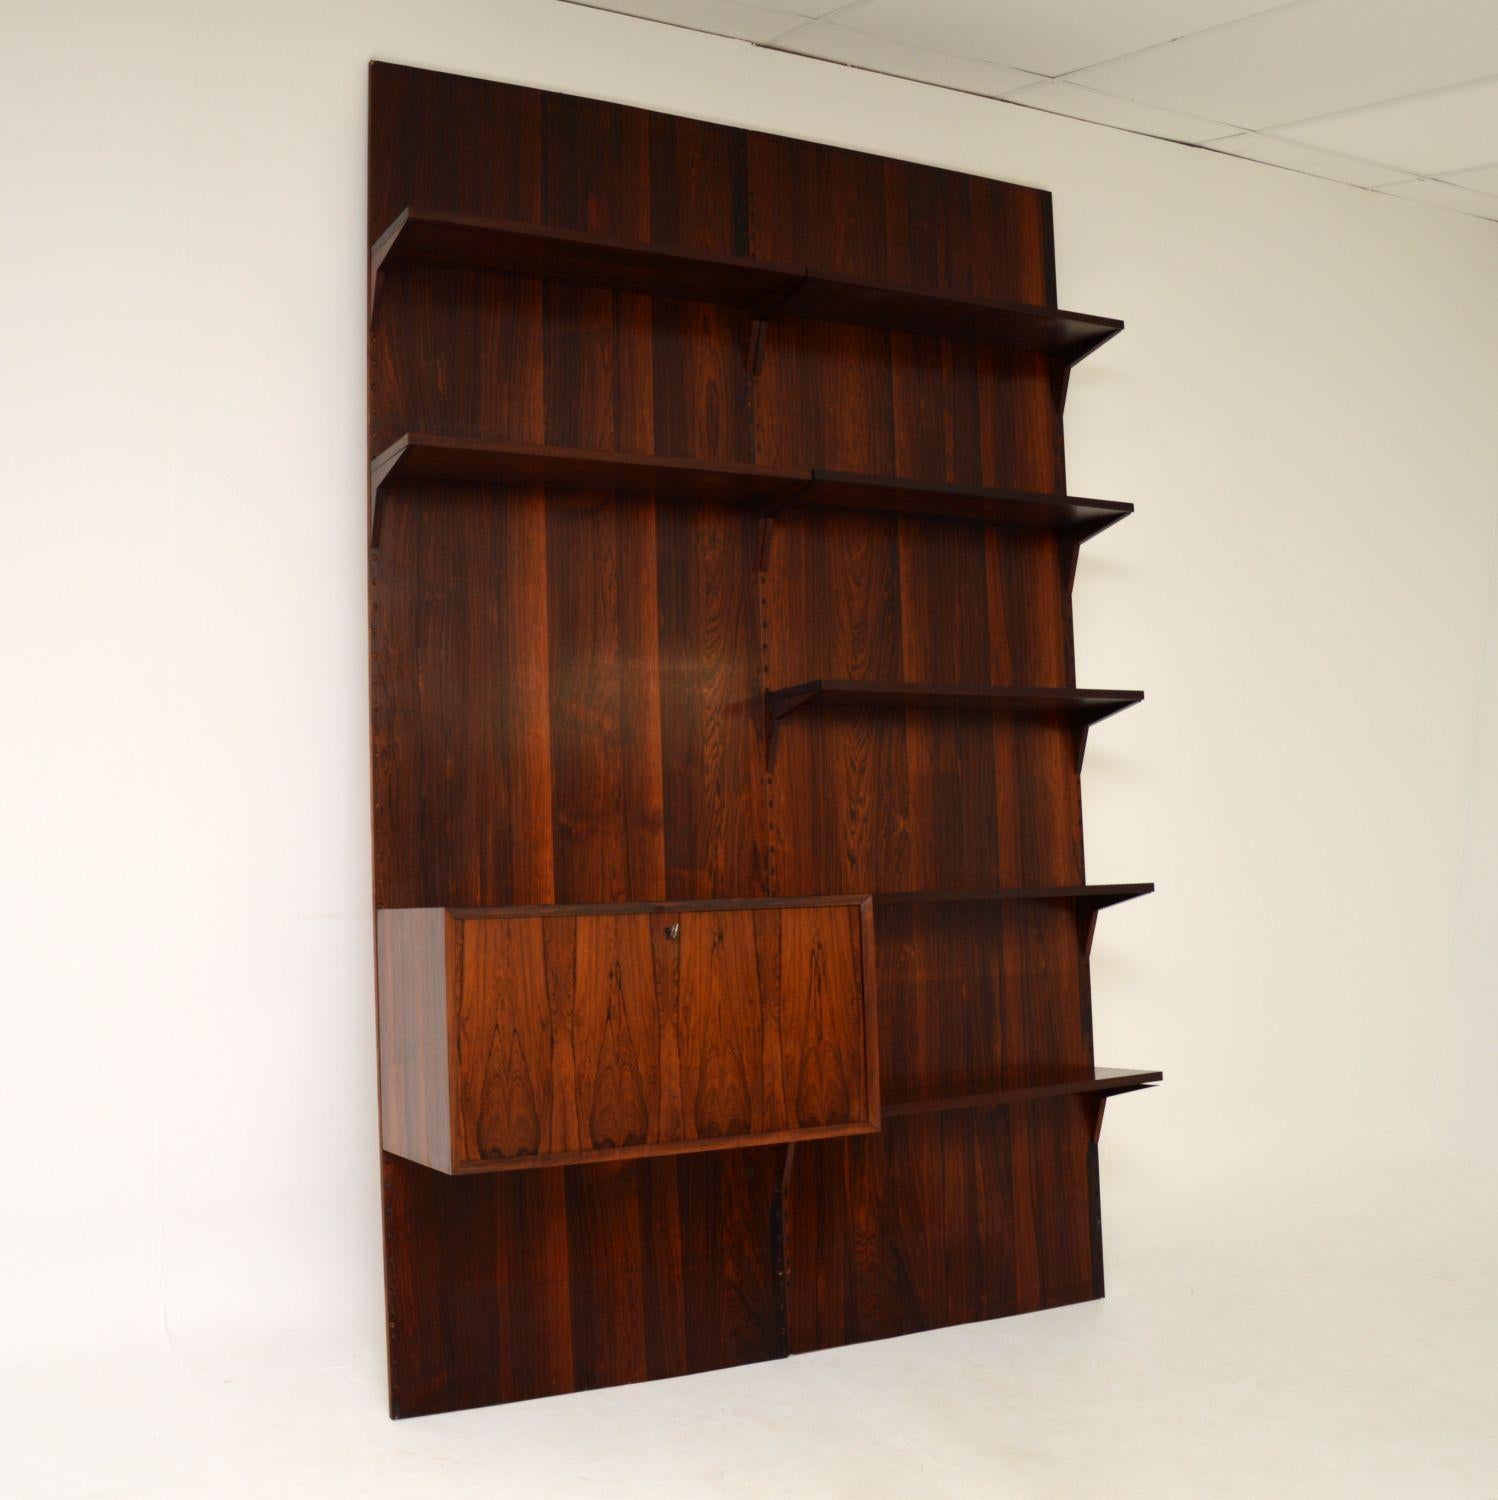 A stunning and rare vintage wood Royal Shelving system, designed by Poul Cadovius. This was made in Denmark, it dates from the 1960-70’s.

It is of absolutely superb quality, and is such a clever design. There are two large flat wood panels that